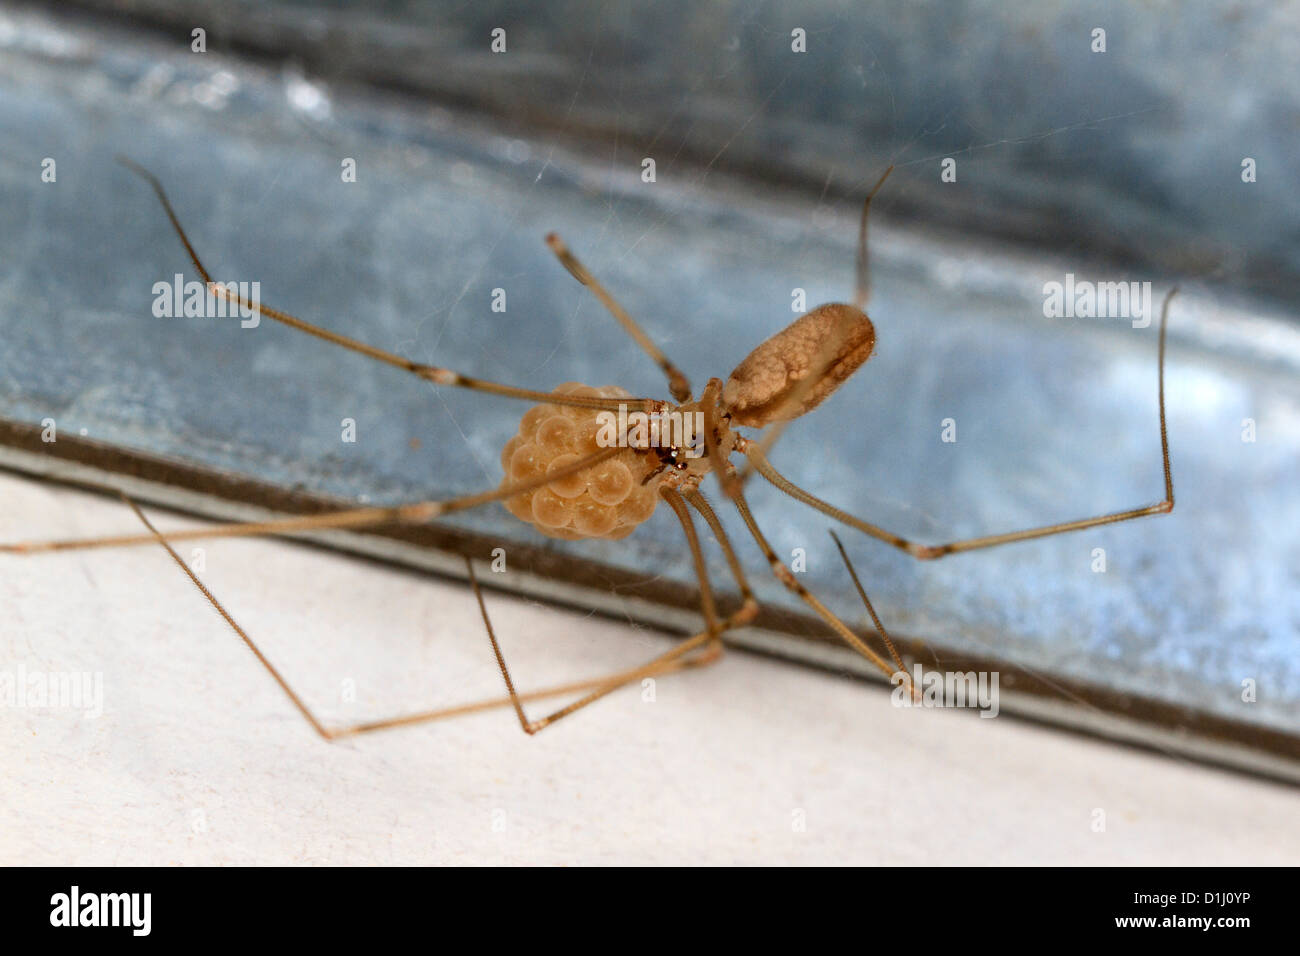 Female cellar spider with egg sac (Pholcus phalangioides) Stock Photo